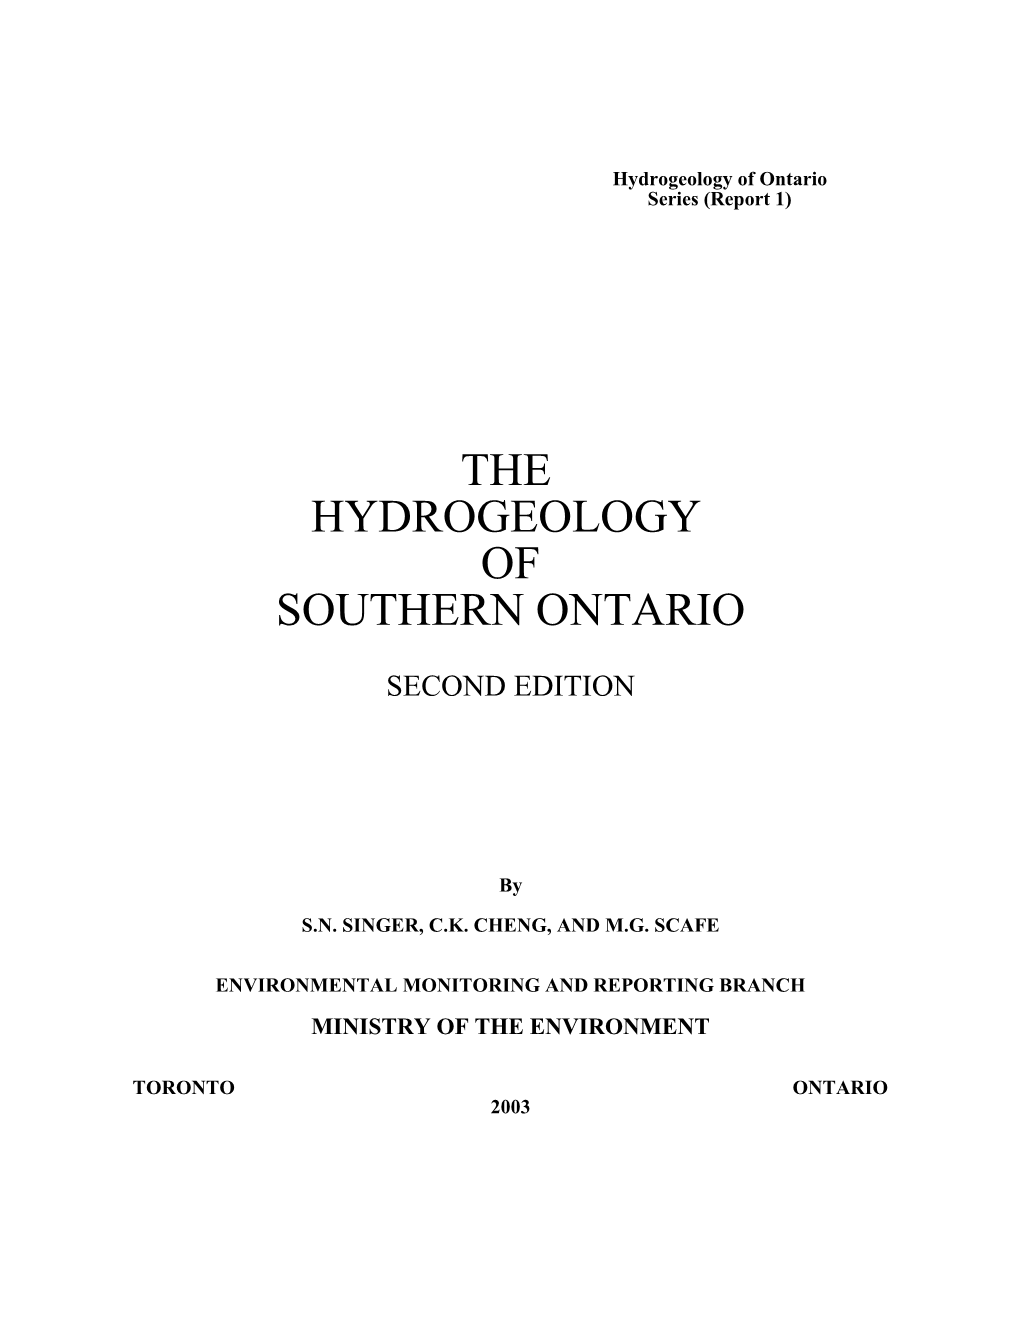 Hydrogeology of Southern Ontario